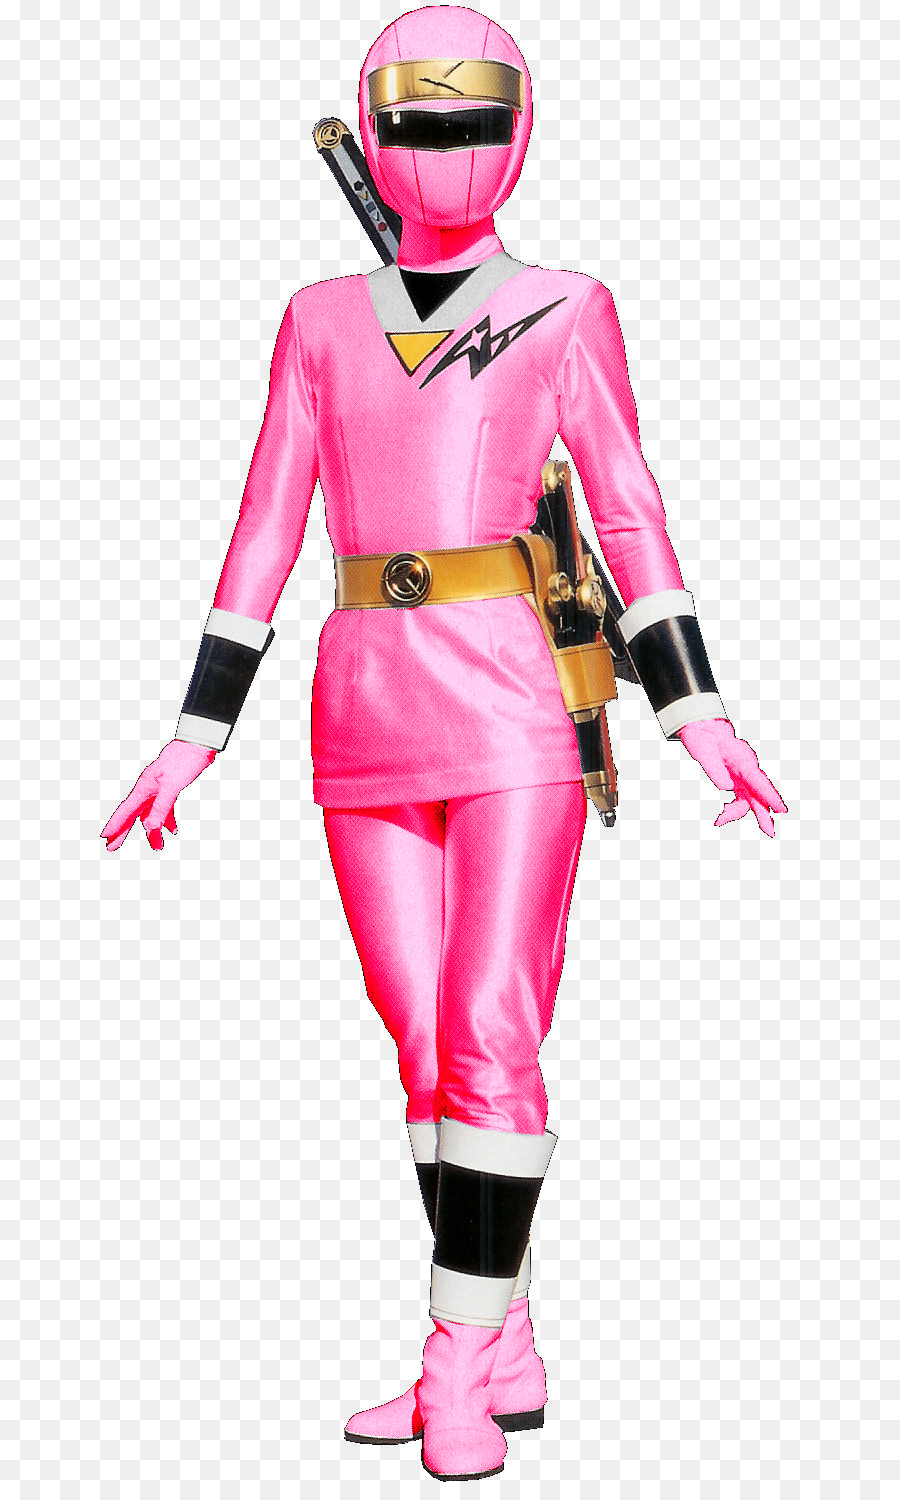 Mighty Morphin Power Rangers: The Fighting Edition Tommy Oliver Kimberly Hart Red Ranger Aquitian Rangers - Power Rangers Transparent PNG png download - 716*1496 - Free Transparent  png Download.